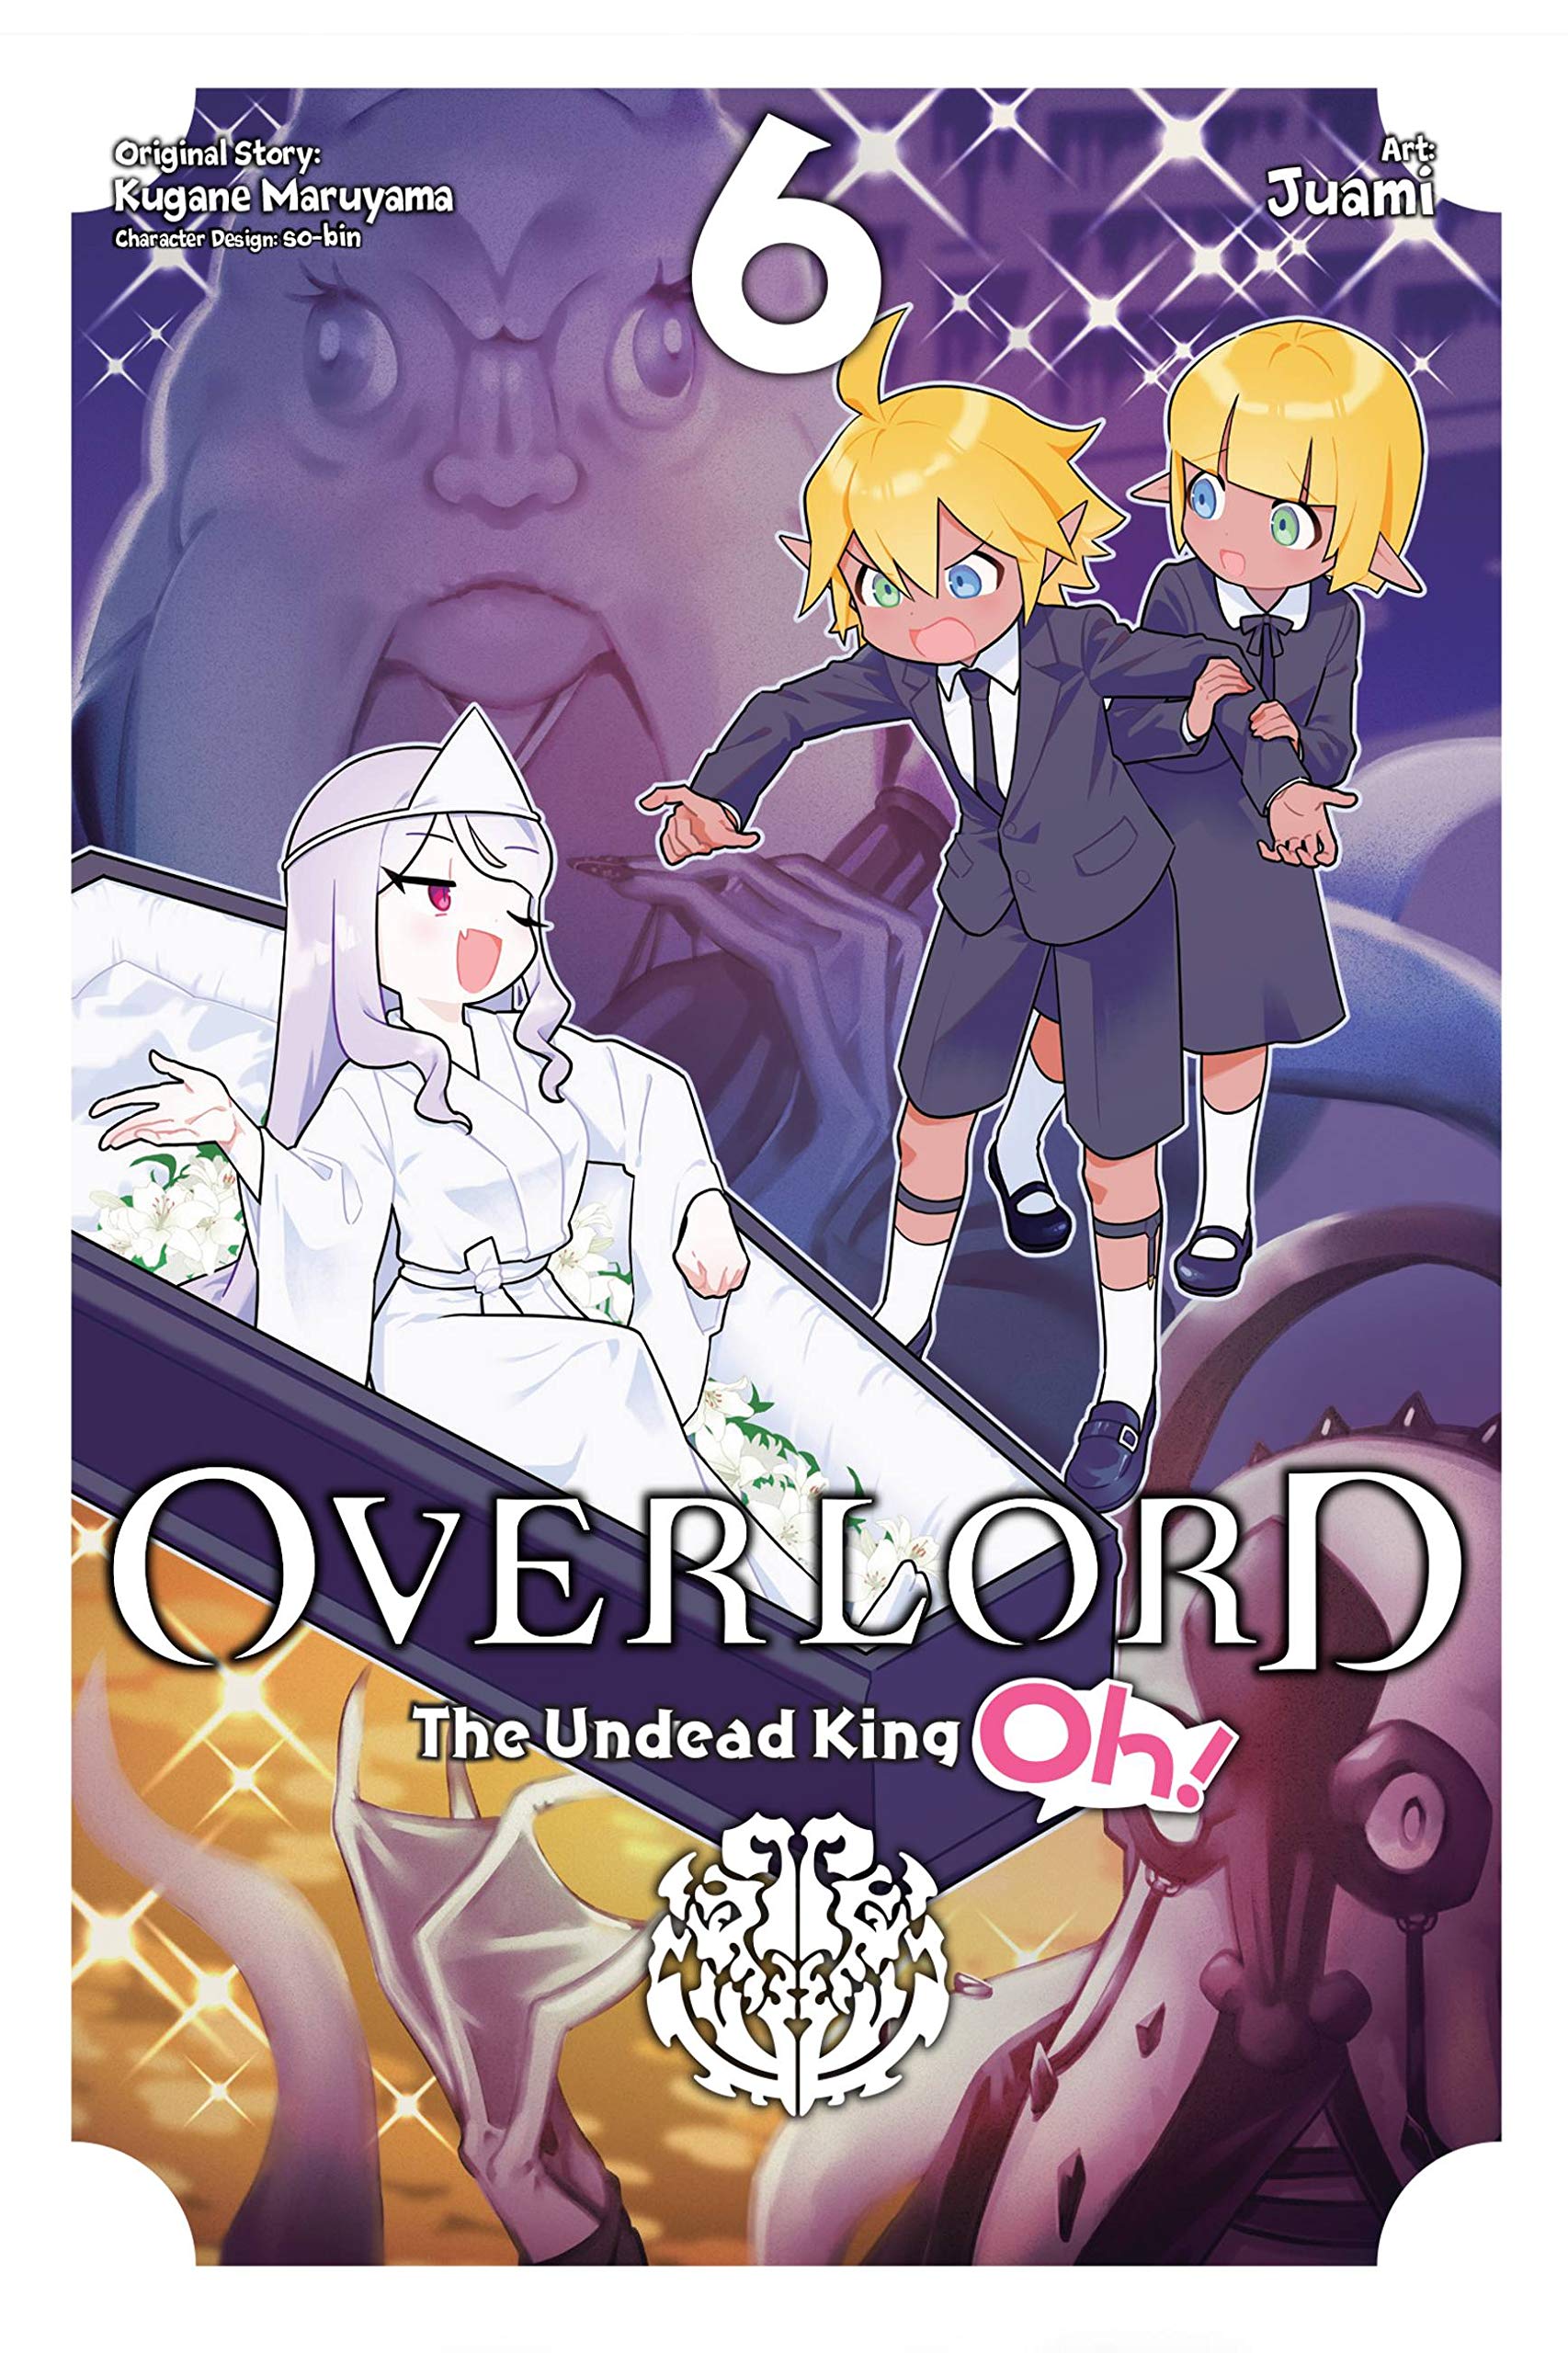 Overlord: The Undead King Oh! Volume 6